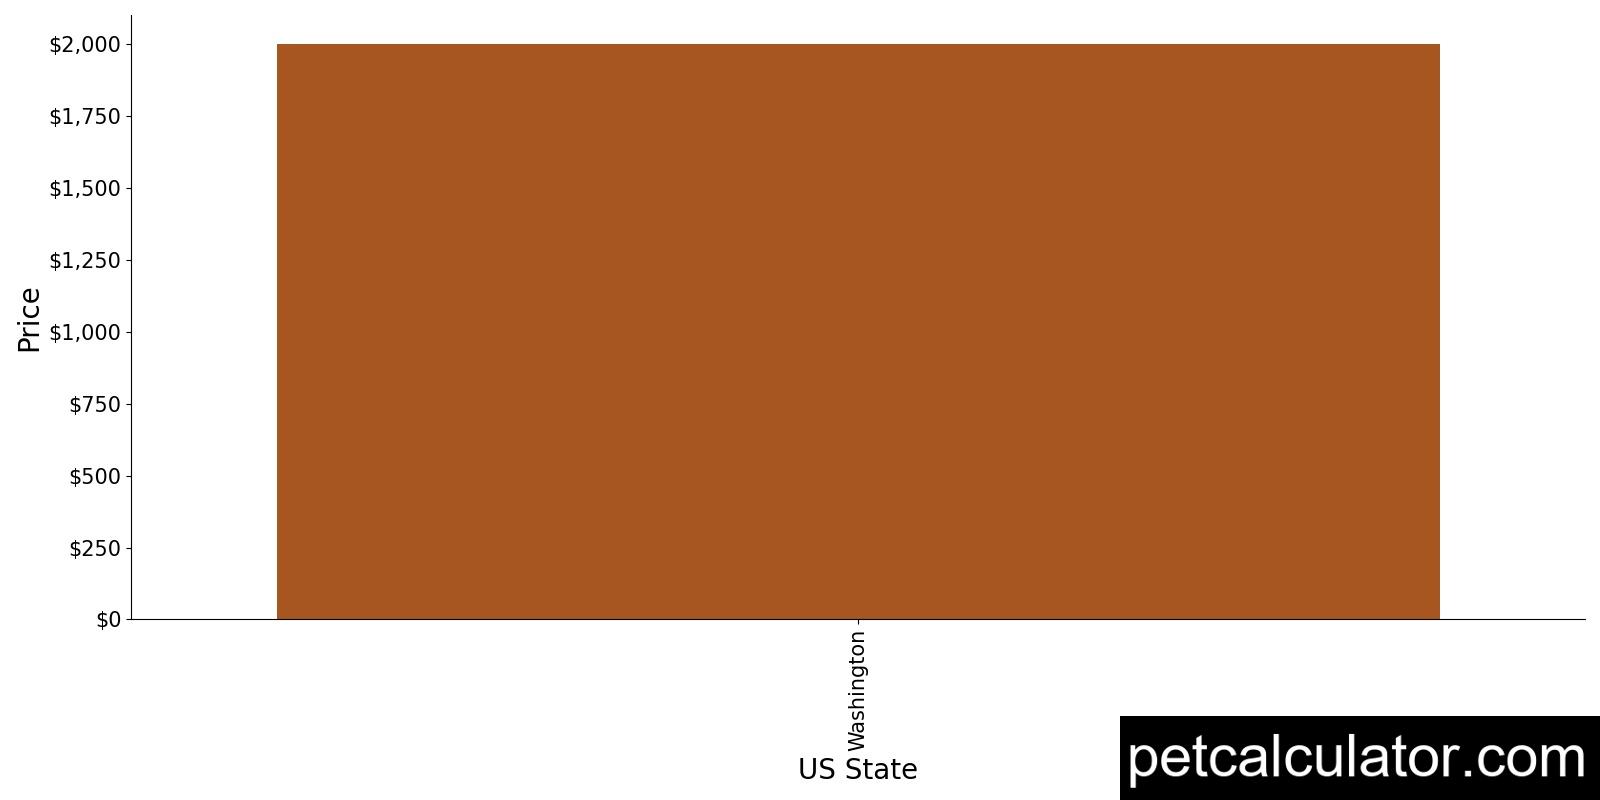 Price of Estrela Mountain Dog by US State 